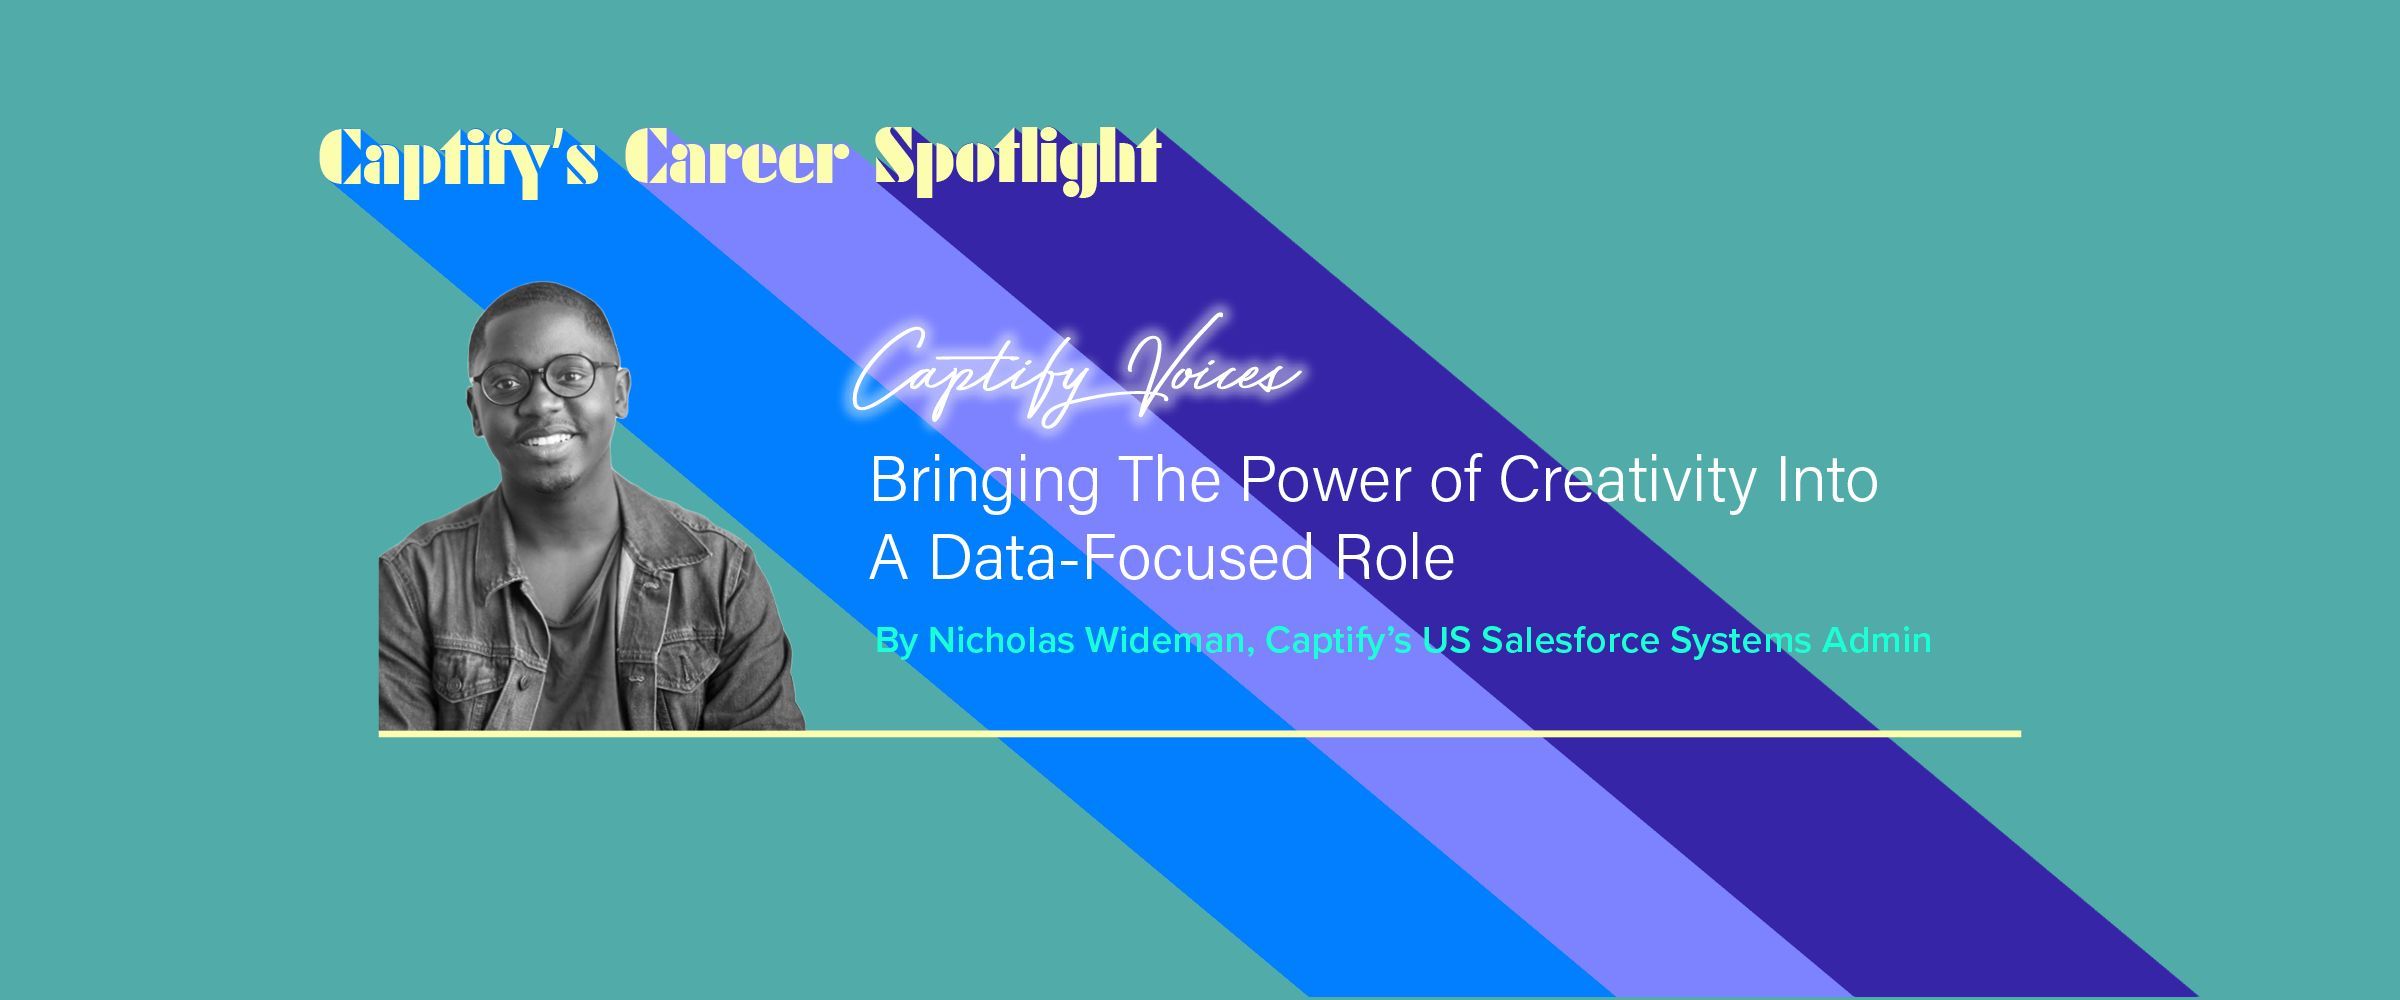 Bringing The Power of Creativity To A Data-Focused Role